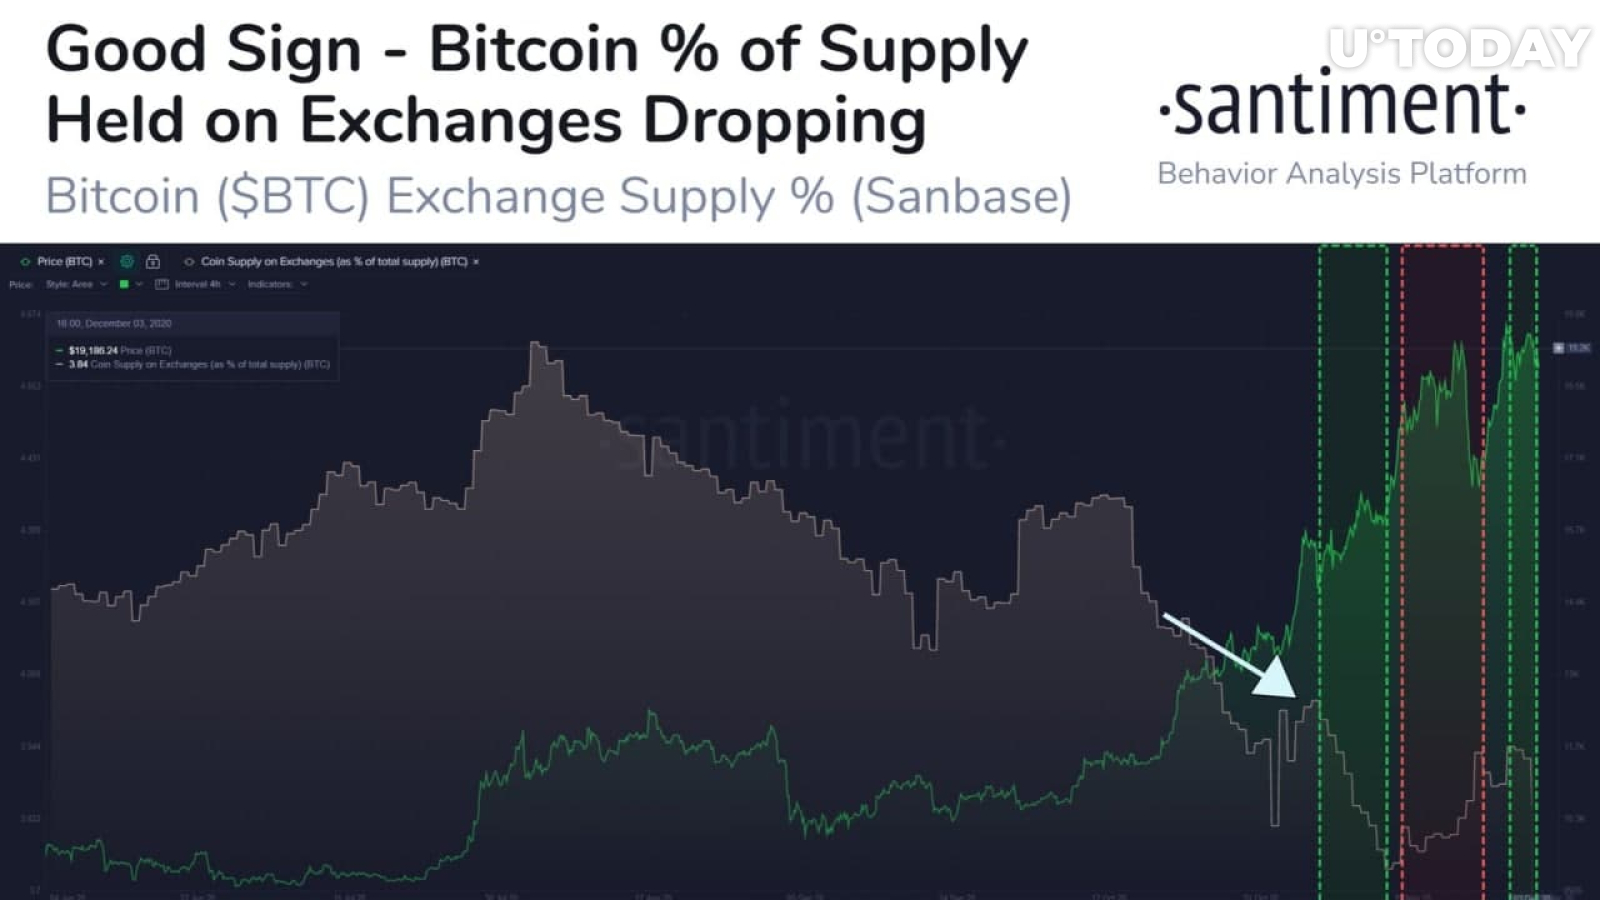 Percentage of Bitcoin held on exchanges